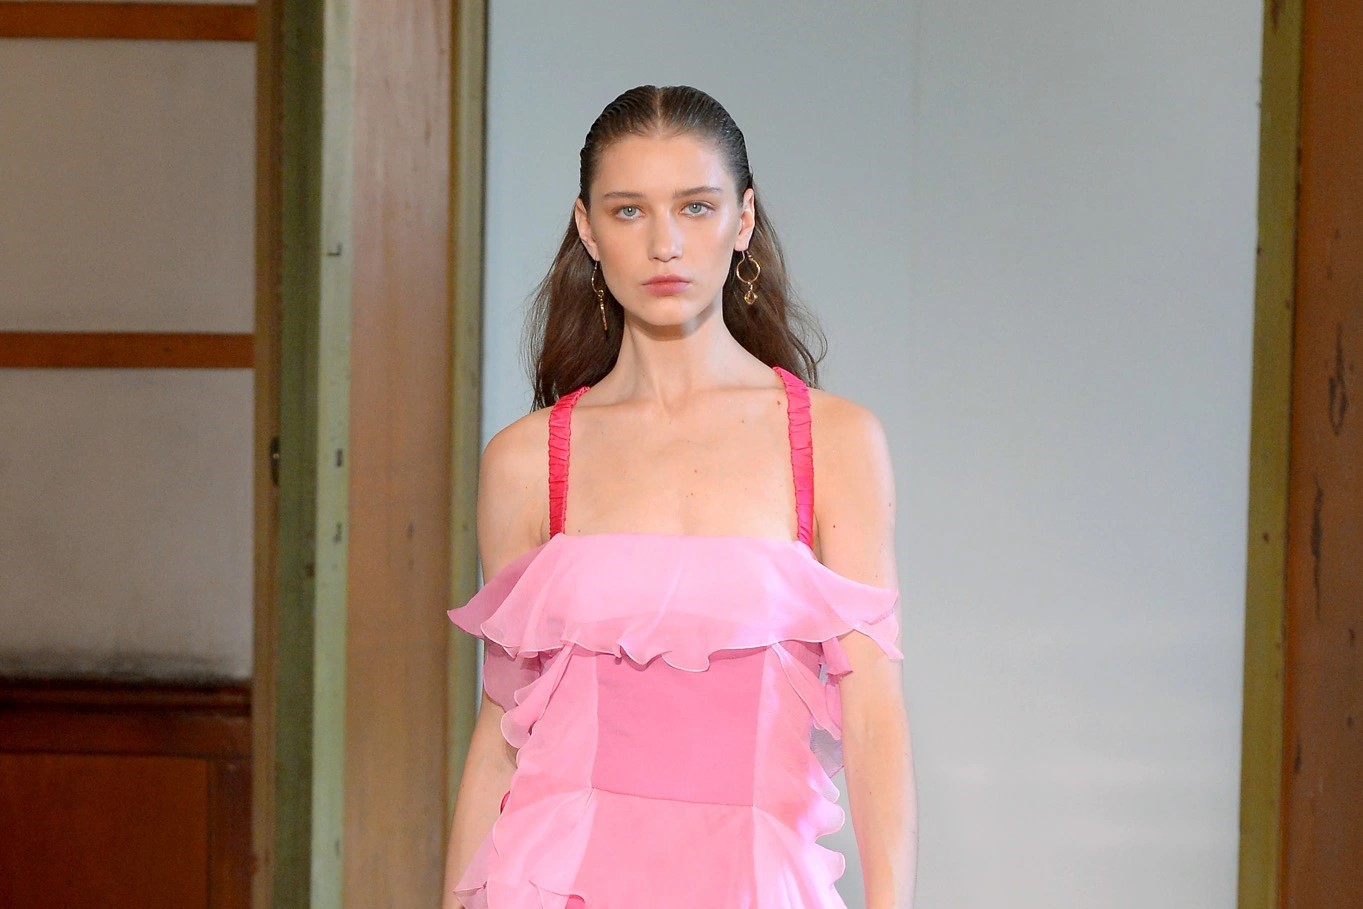 The return of ruffle dress after 20 years